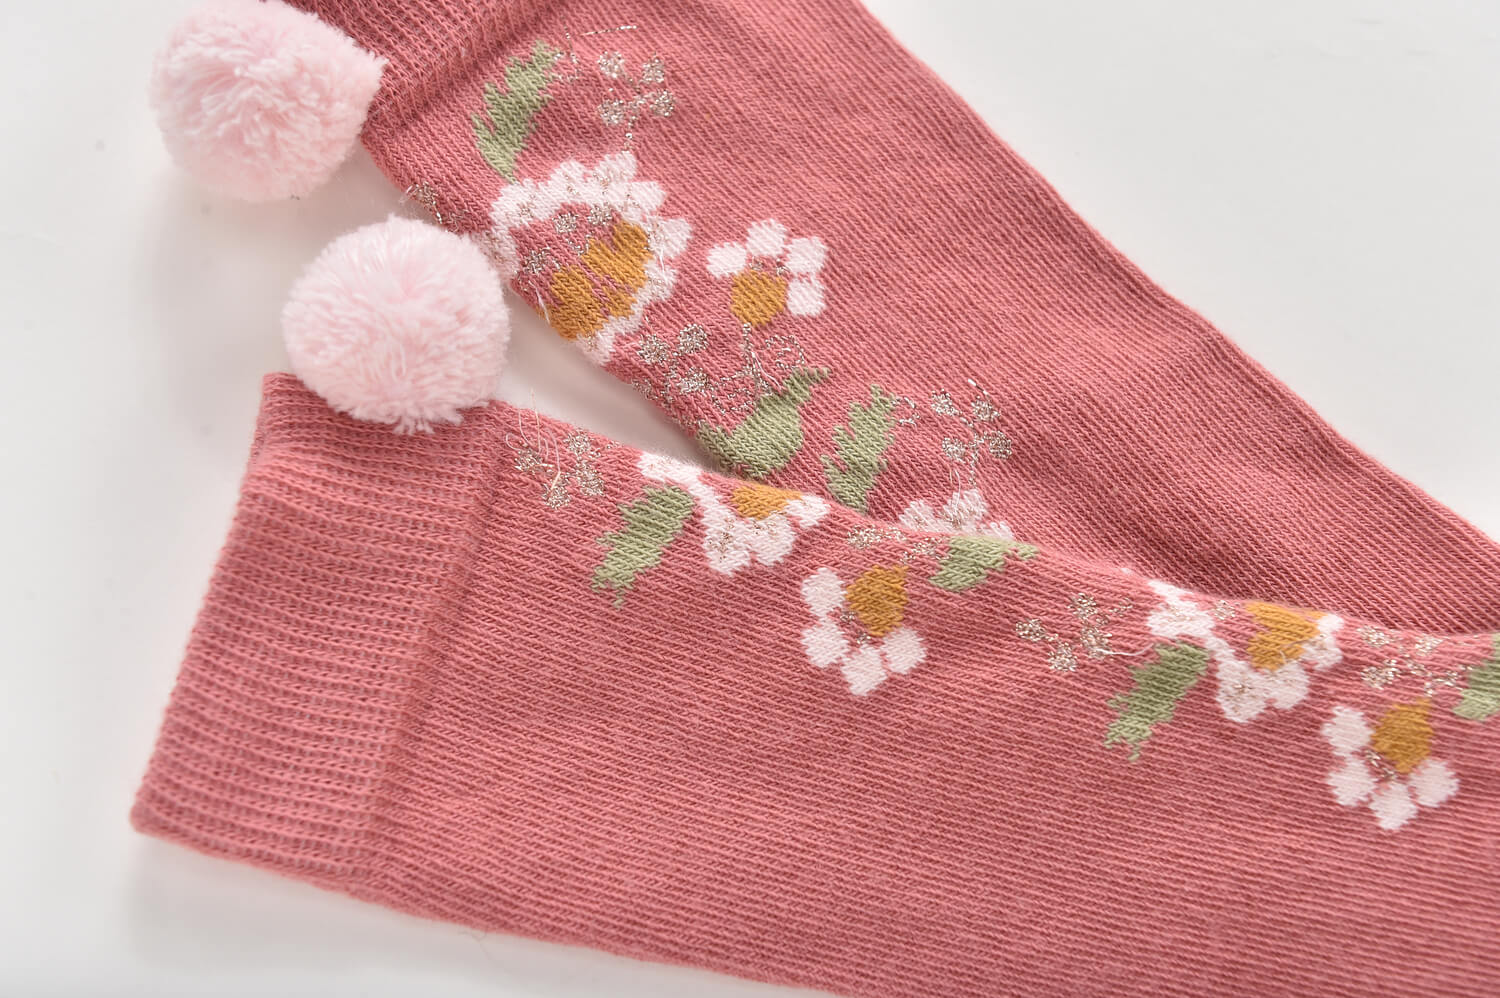 For every outfit, it's essential to have cute socks, and the Sienna socks in pink with floral patterns and handmade pompoms by Louise Misha are perfect for little girls. MiliMilu is the go-to online store in Hong Kong and Singapore for practical and stylish baby accessories, as well as the best baby girl gifts.